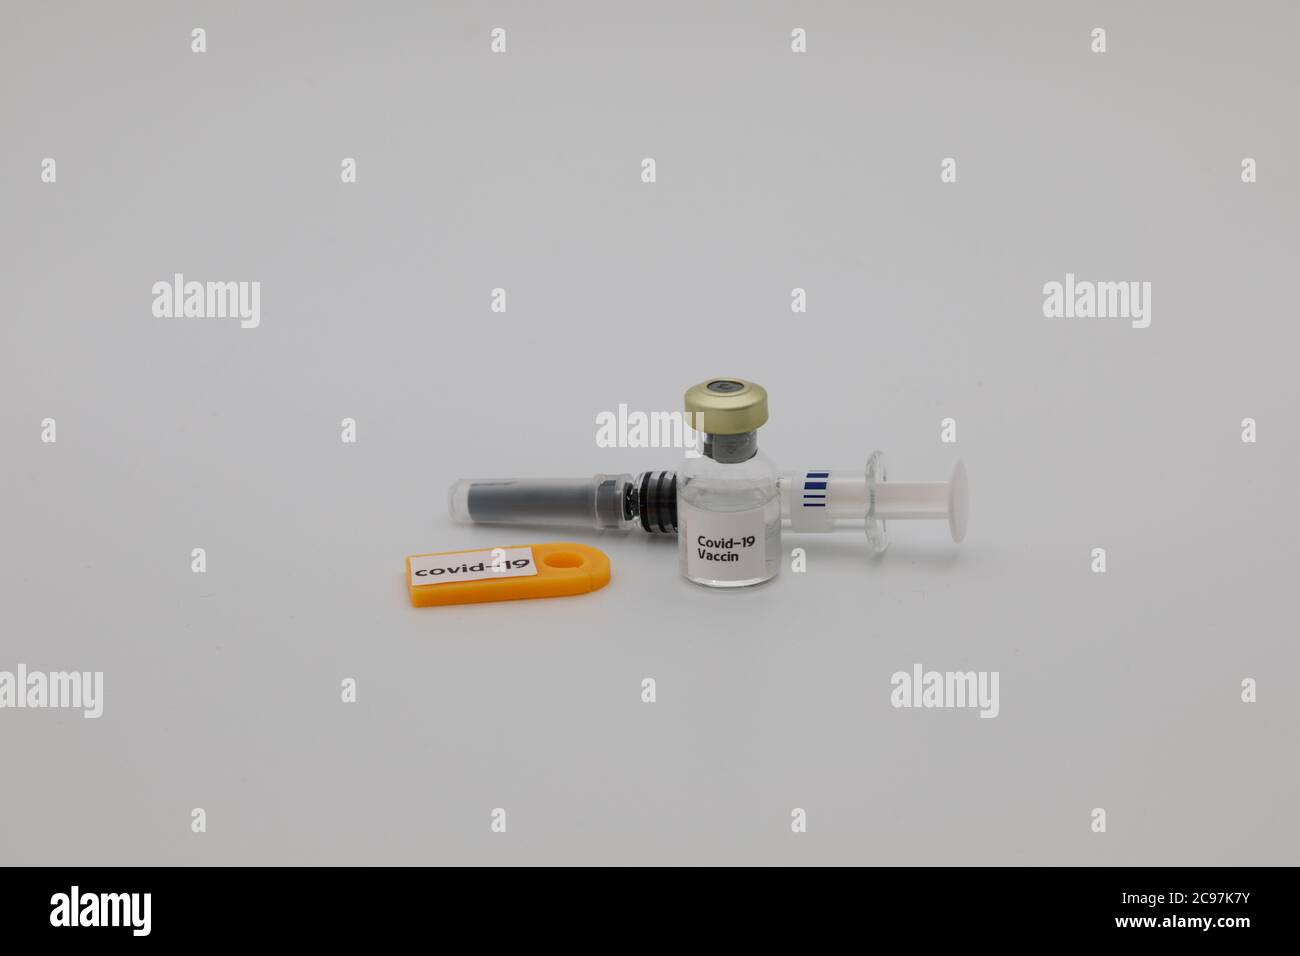 Covid-19 vaccin in flacon and accmpanied with syringe Stock Photo